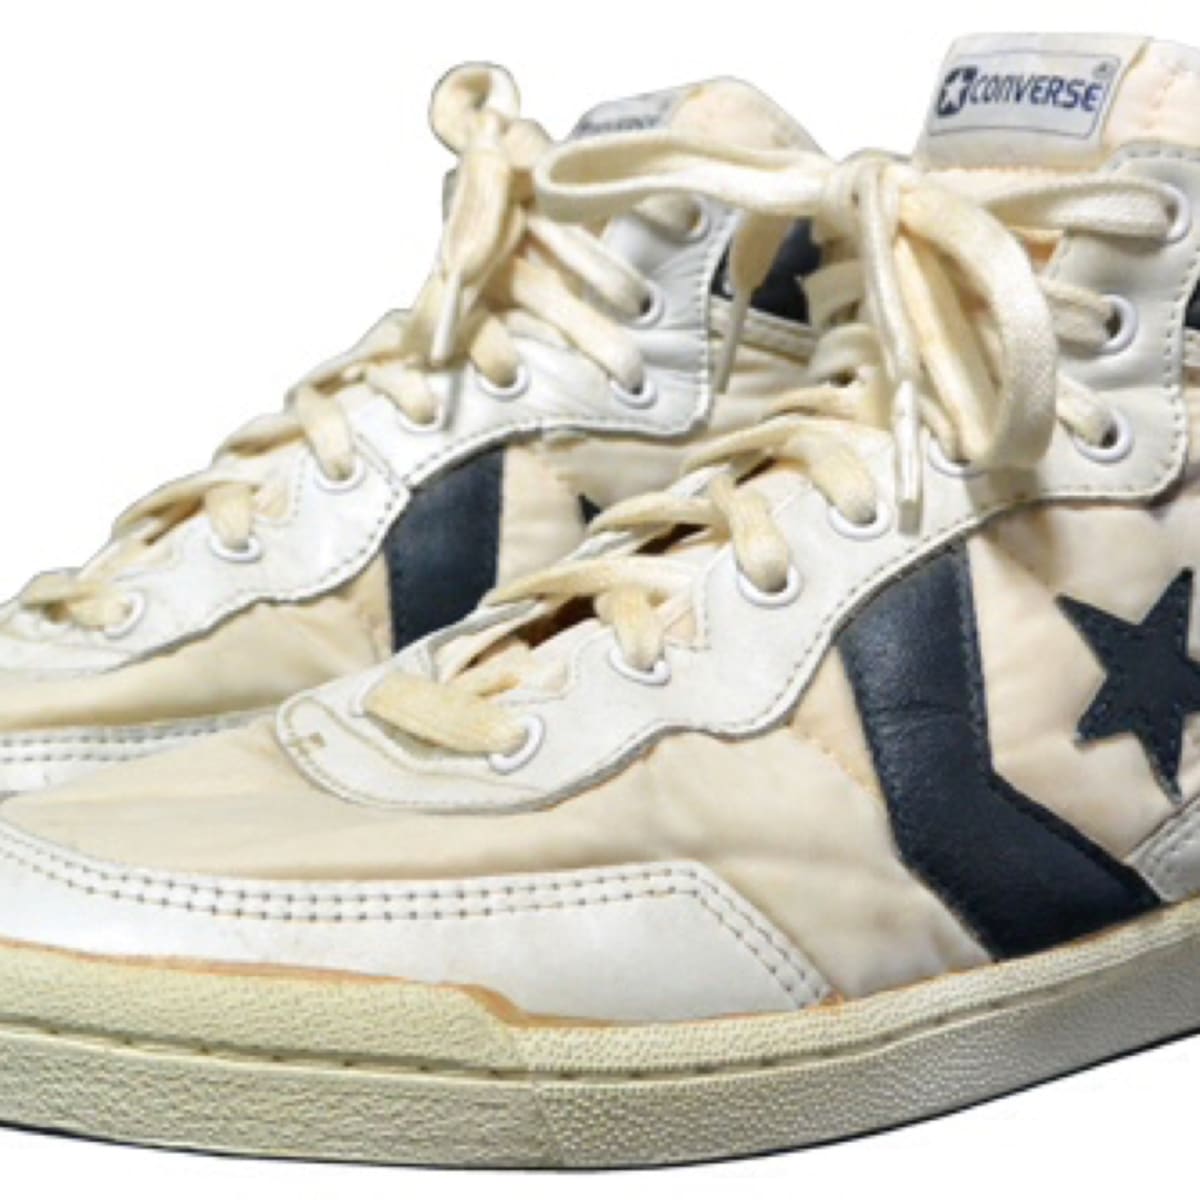 1984 Olympic shoes auction 